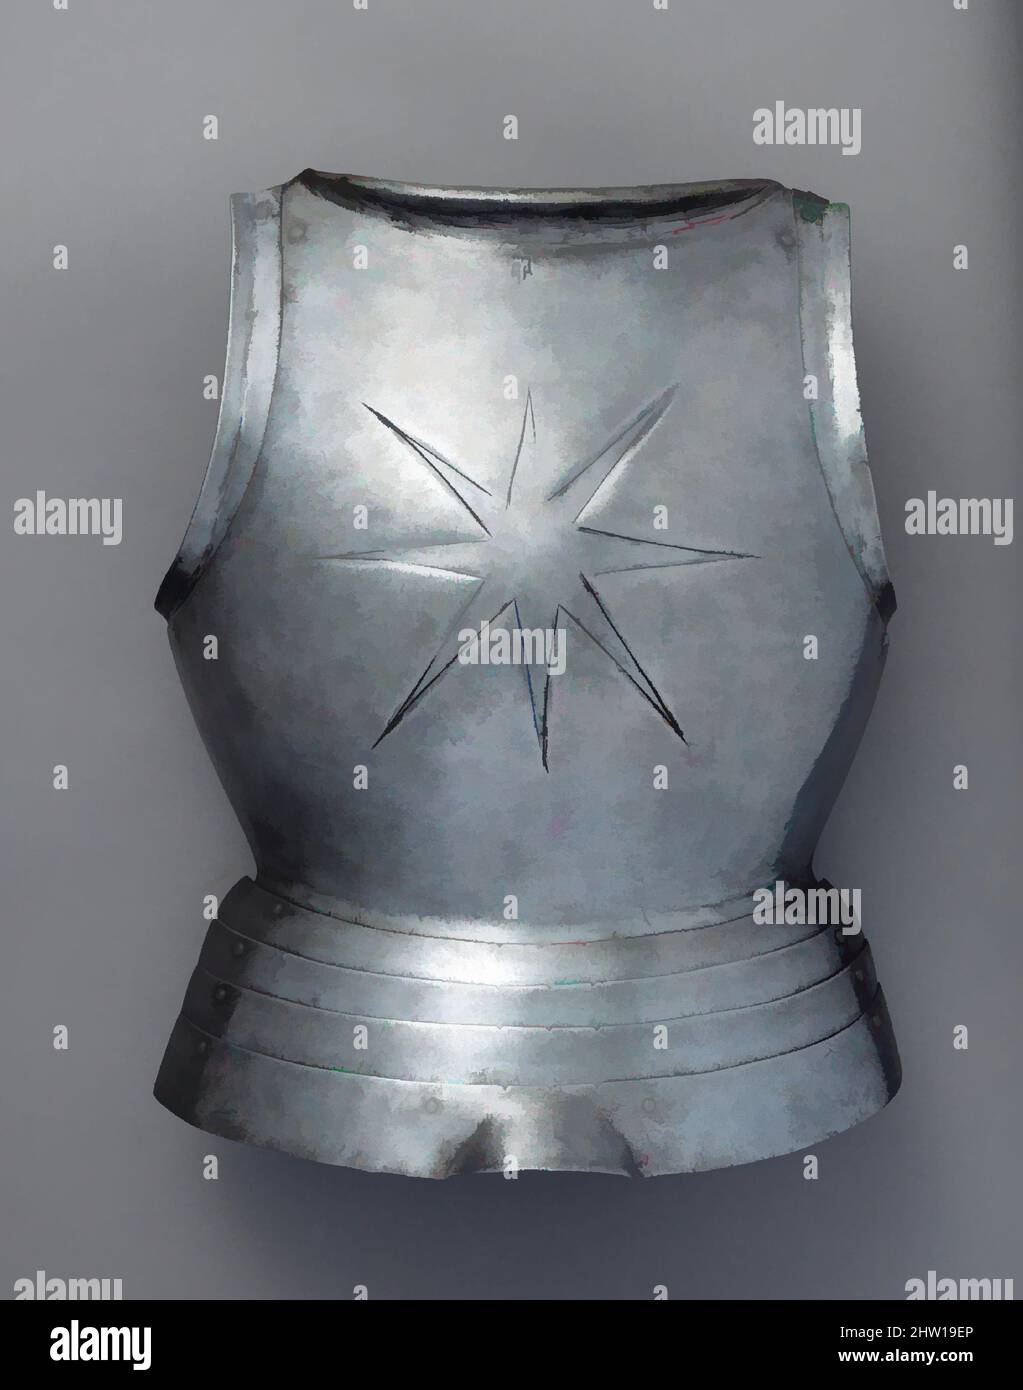 Art inspired by Breastplate, ca. 1500–10, German, Steel, leather, H. 18 1/2 in. (46.8 cm); W. 14 1/2 in. (36.7 cm); D. 6 1/4 in. (16 cm); Wt. 6 lb. 4 oz. (2832 g), Armor Parts-Breastplates, This simple but well-made breastplate for infantry use is remarkable for the technique of its, Classic works modernized by Artotop with a splash of modernity. Shapes, color and value, eye-catching visual impact on art. Emotions through freedom of artworks in a contemporary way. A timeless message pursuing a wildly creative new direction. Artists turning to the digital medium and creating the Artotop NFT Stock Photo